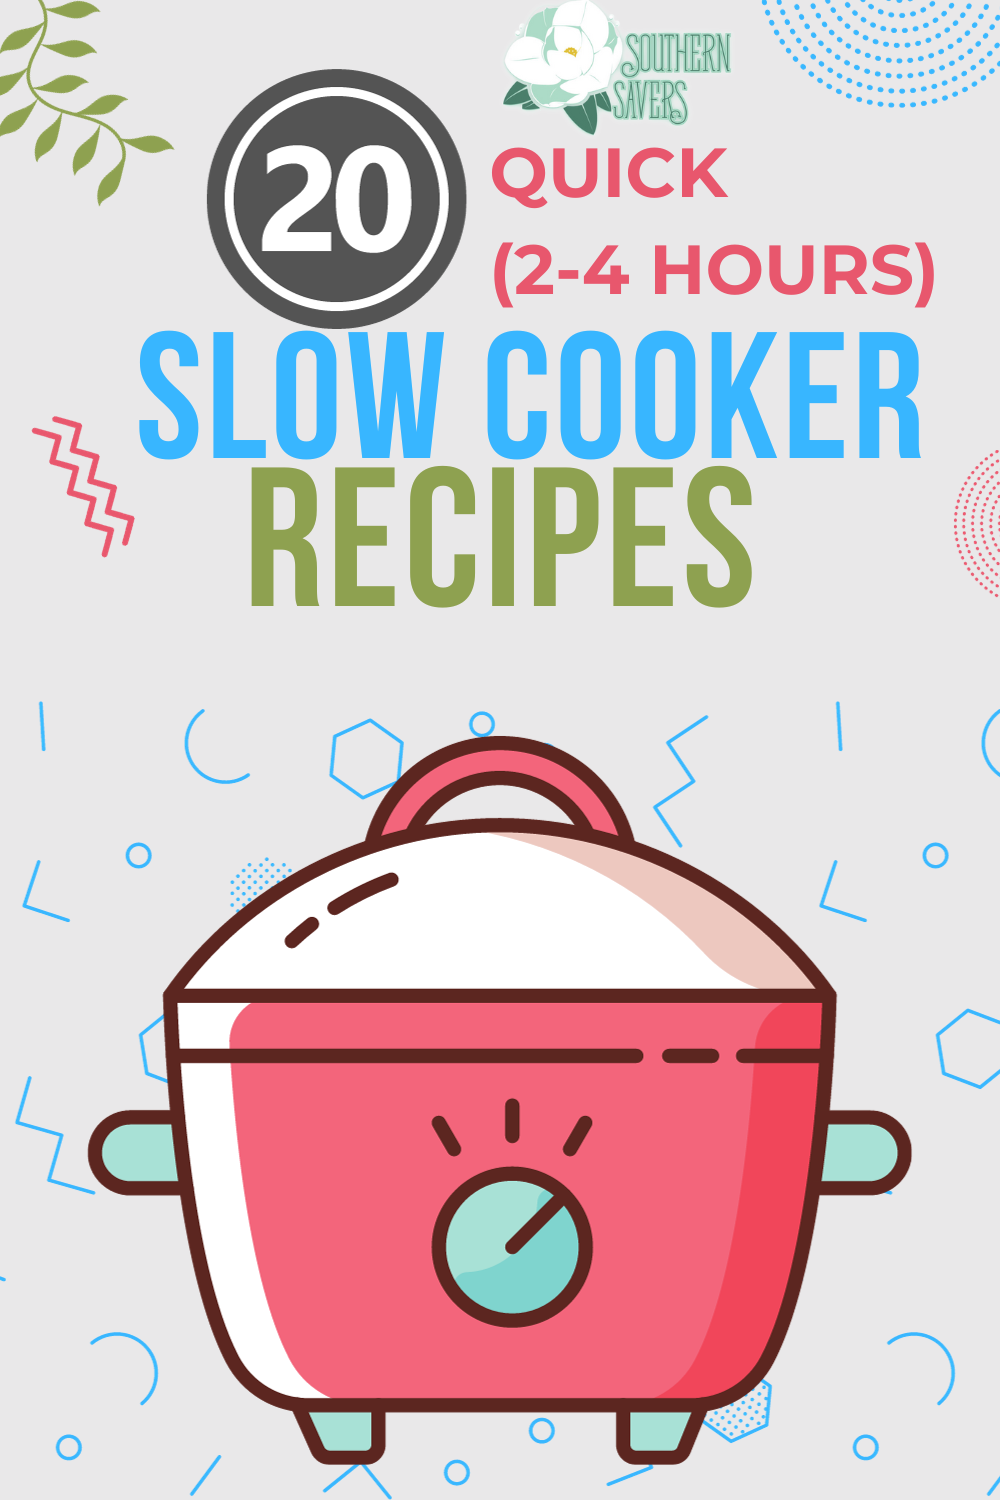 It might sound like an oxymoron, but you might want one of these 20 quick slow cooker recipes for when you only have a few hours to prep a meal.